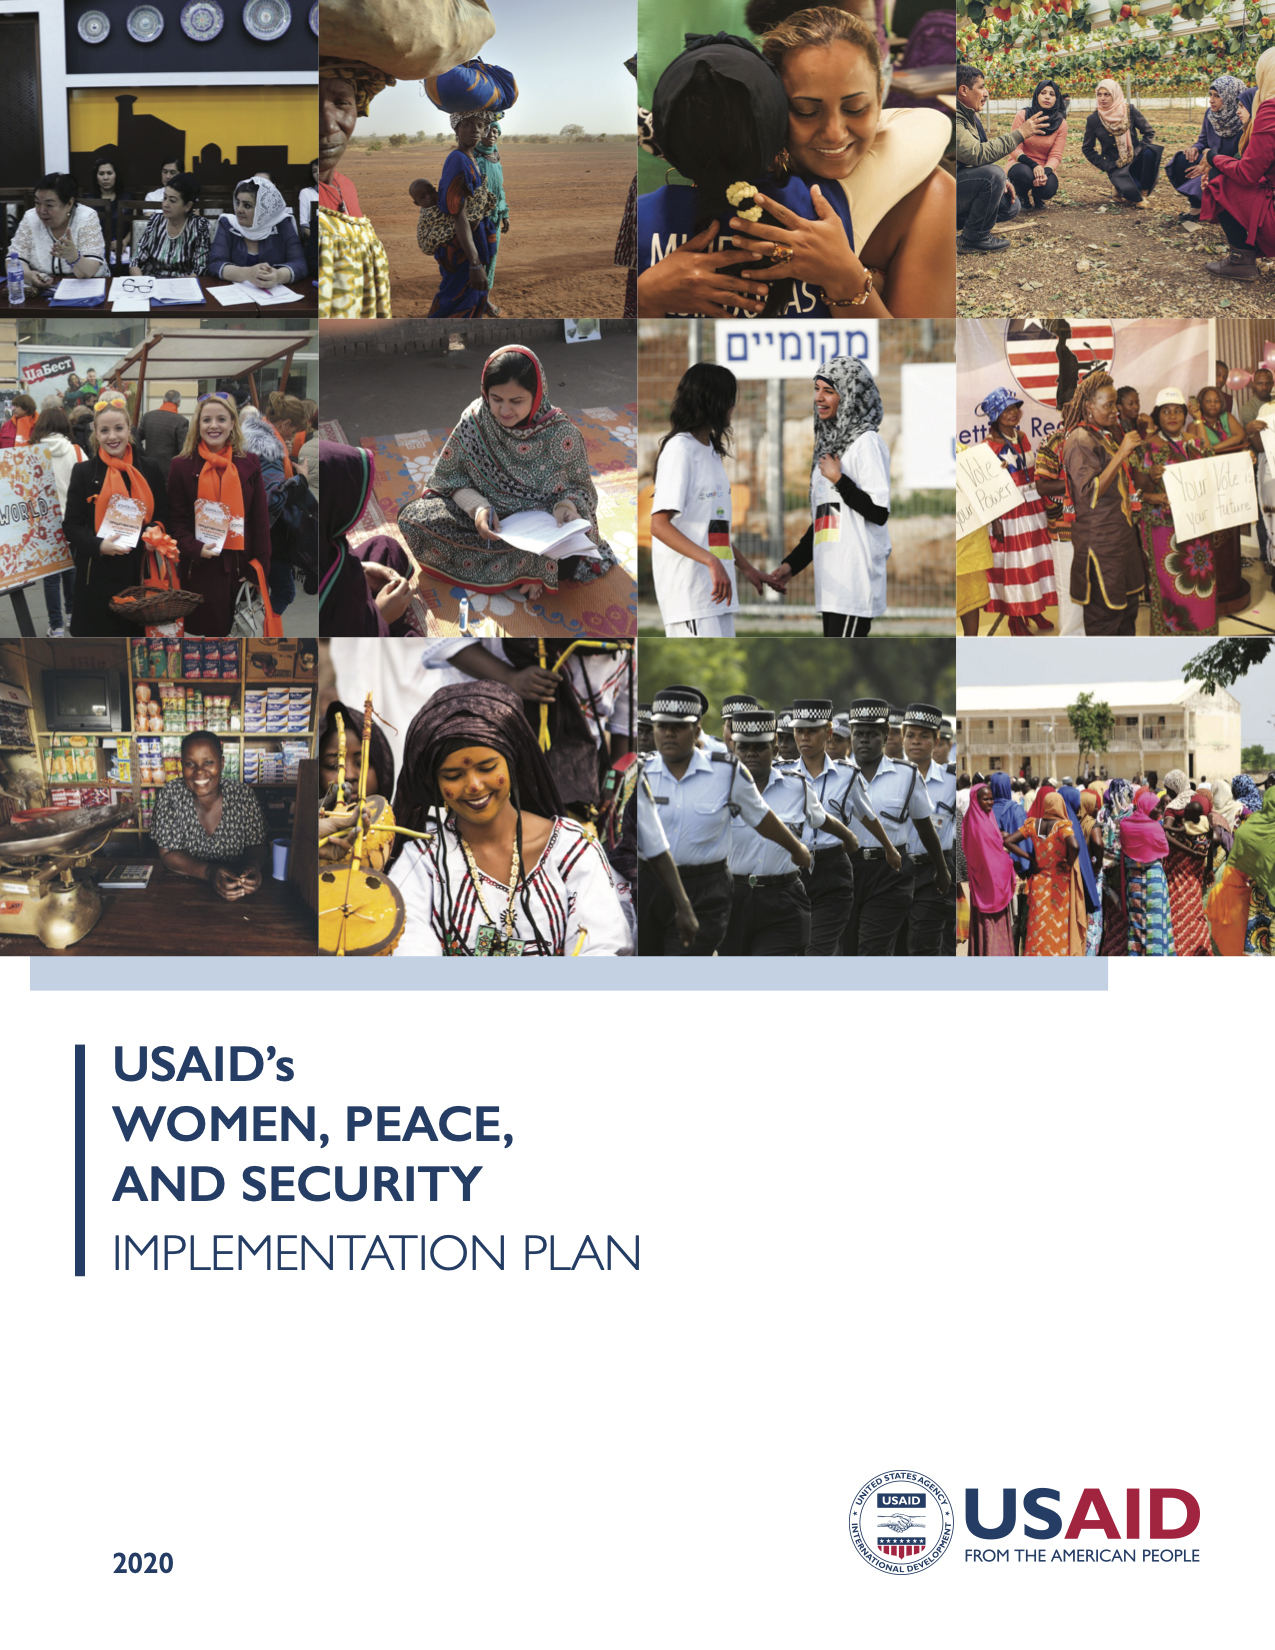 The United States Strategy on Women, Peace, and Security responds to the Women, Peace, and Security Act of 2017. 